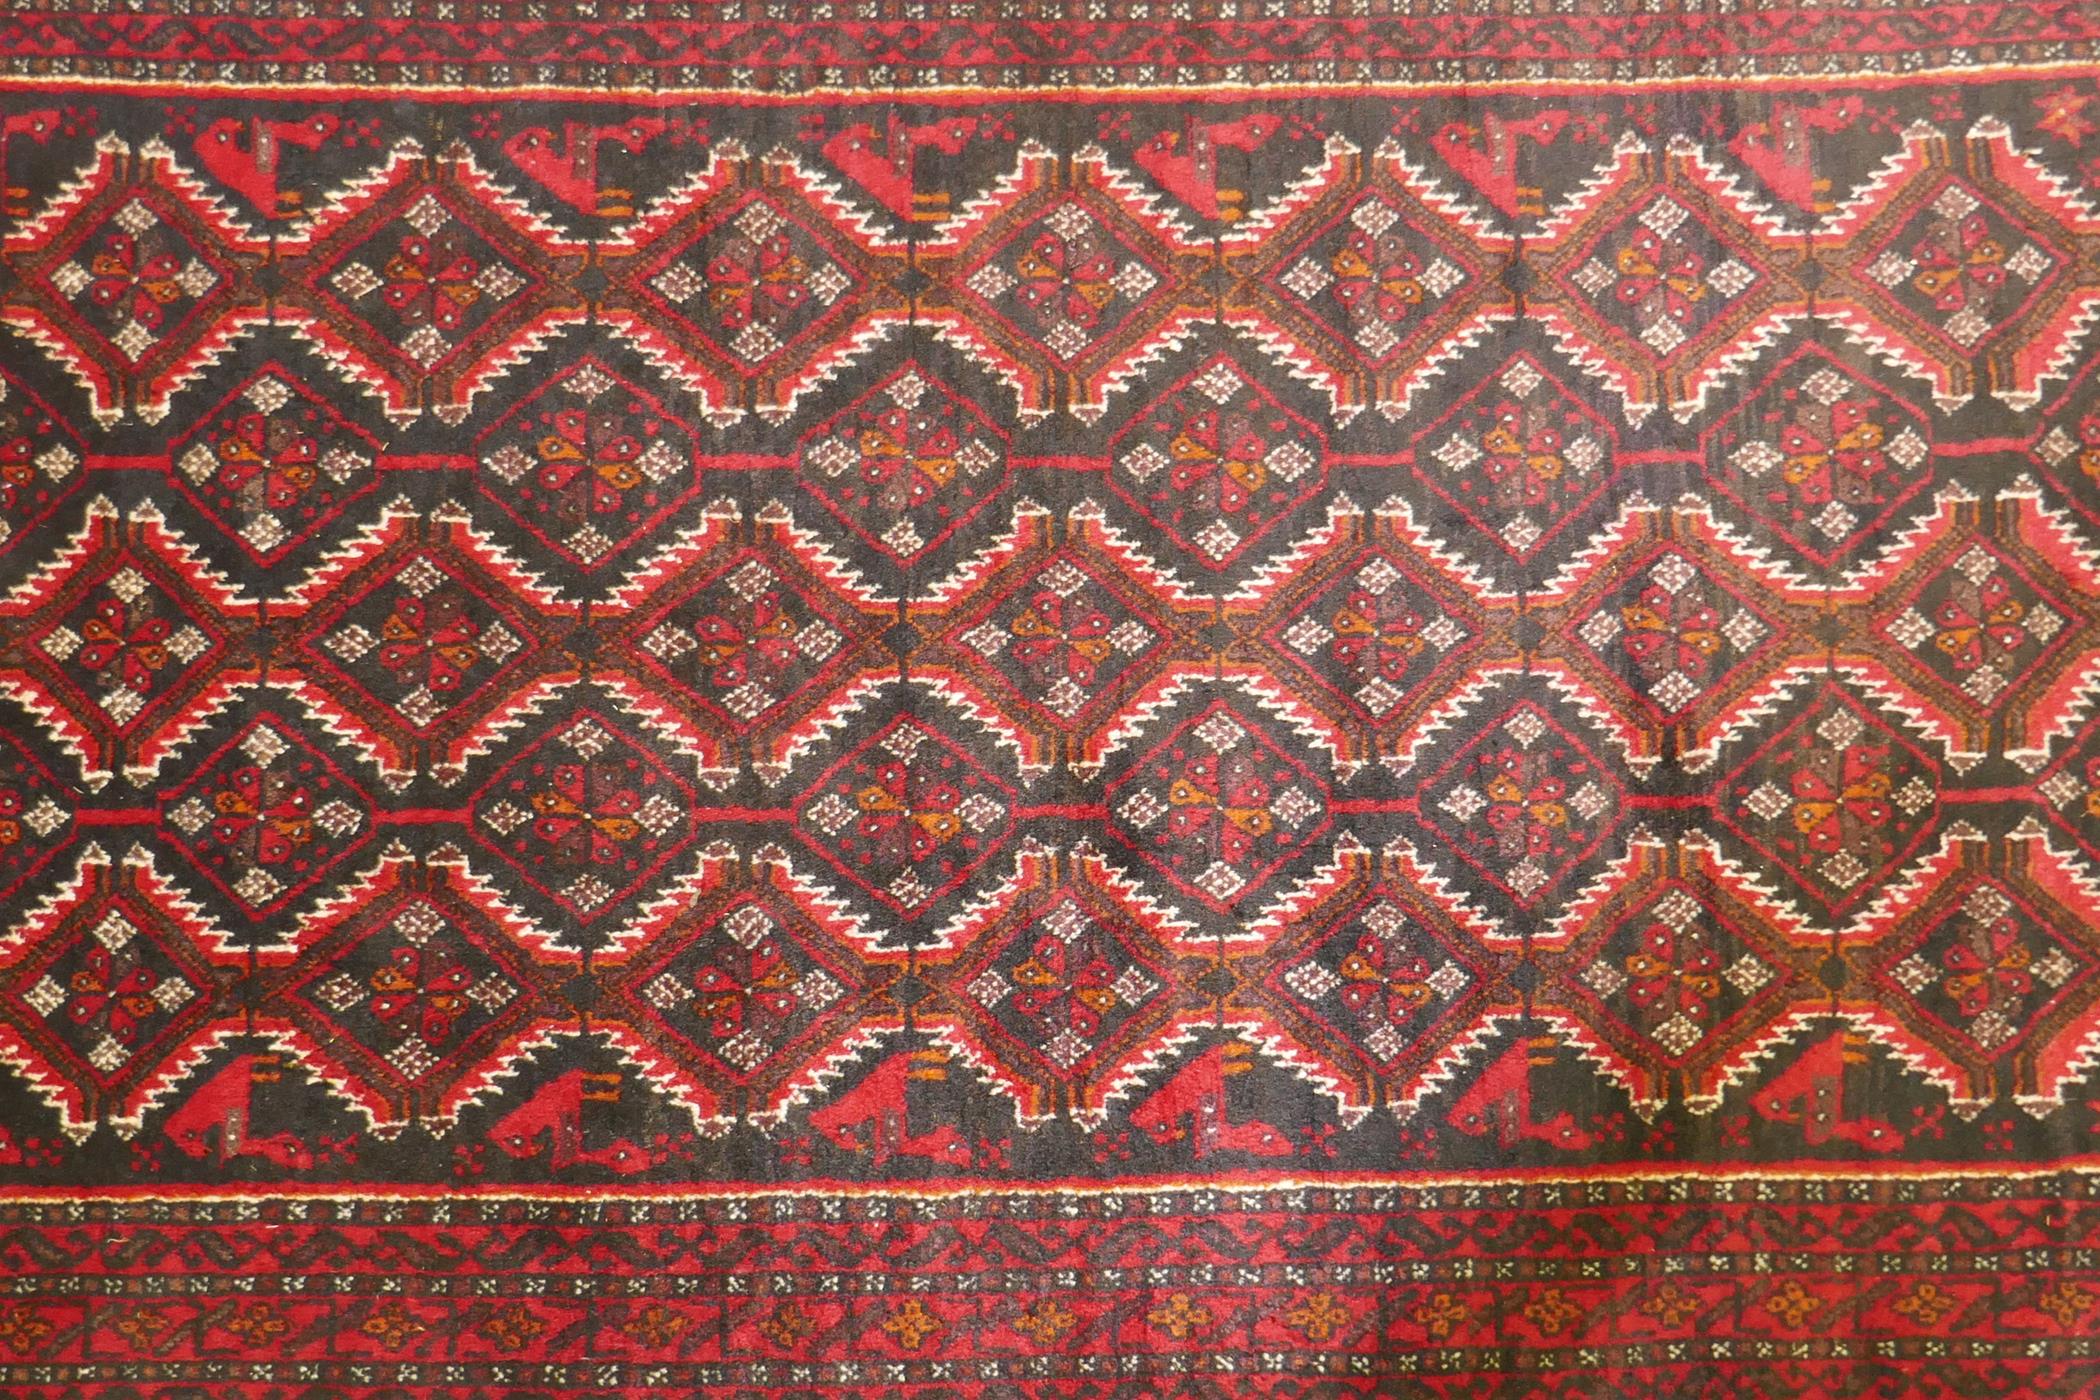 A Belouch wool rug, geometric designs on a plum red field, 62" x 36" - Image 2 of 3